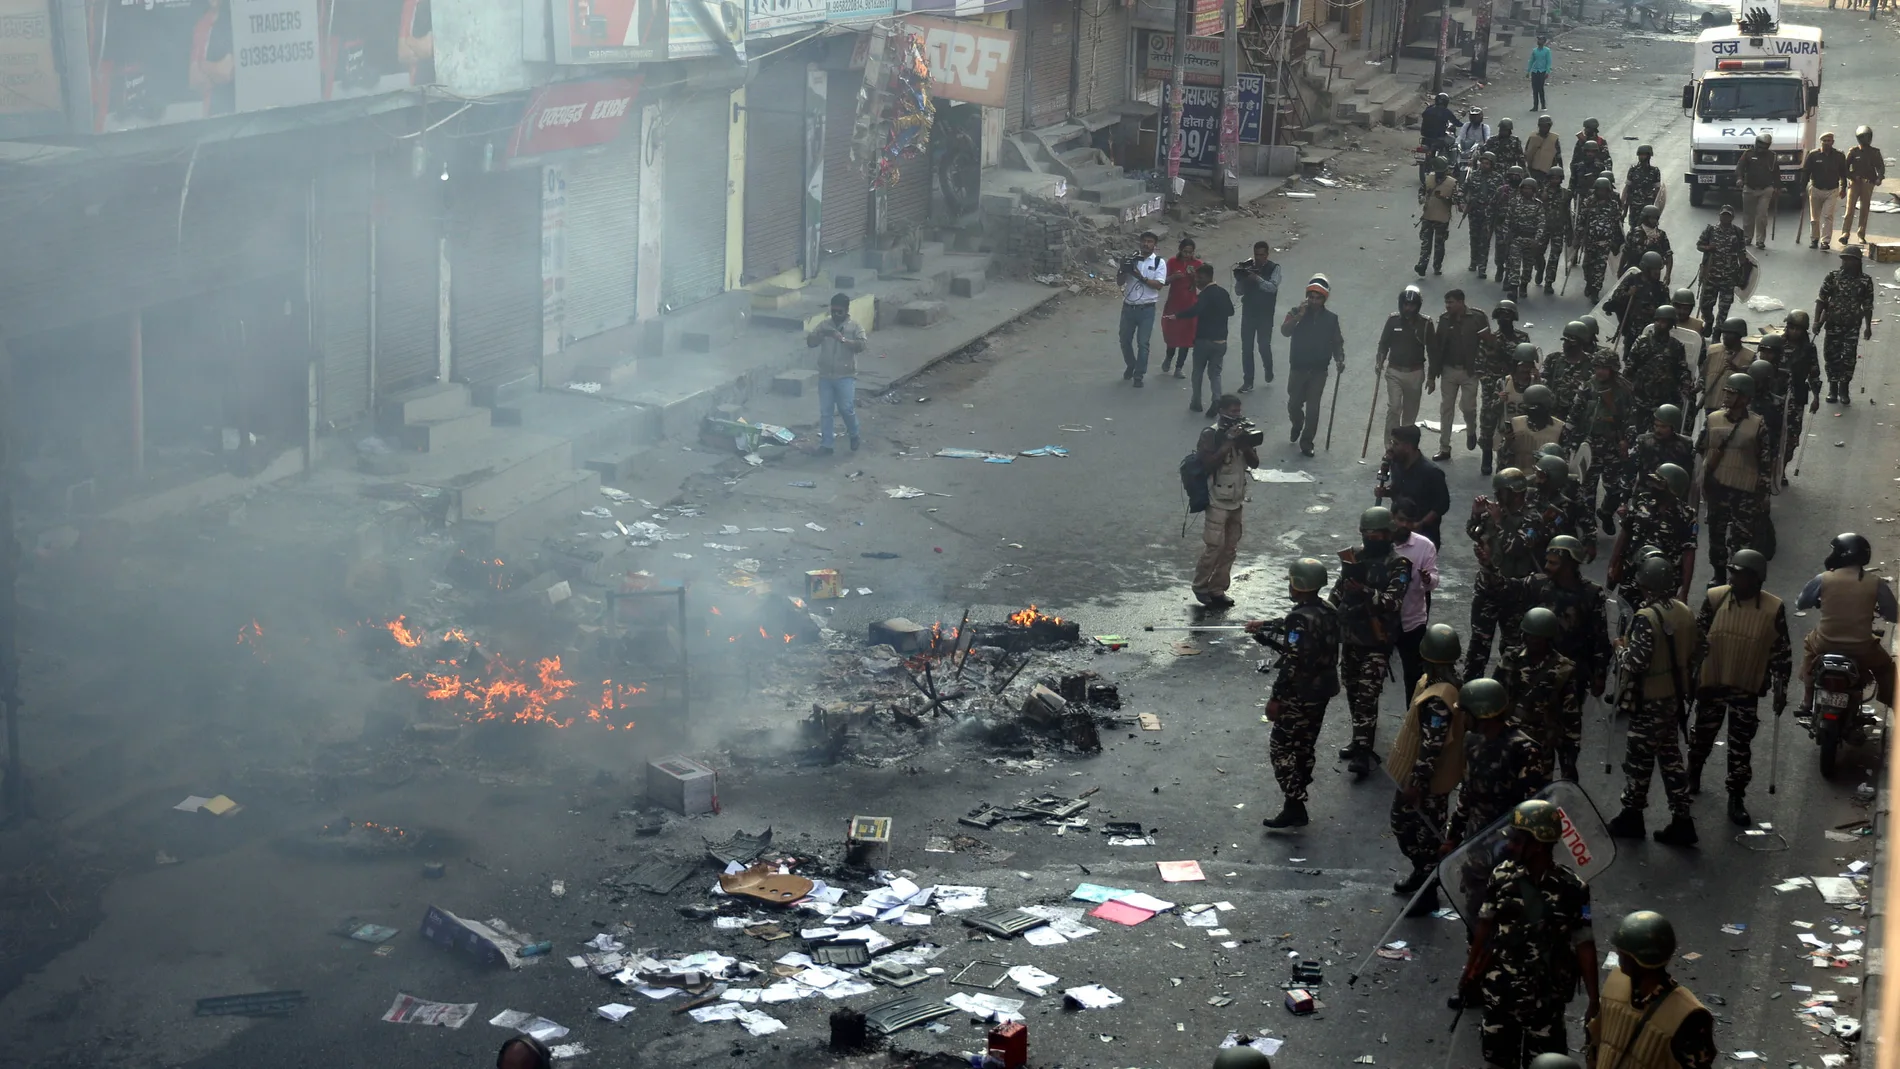 Several killed in clashes between supporters and opponents of the CAA in New Delhi